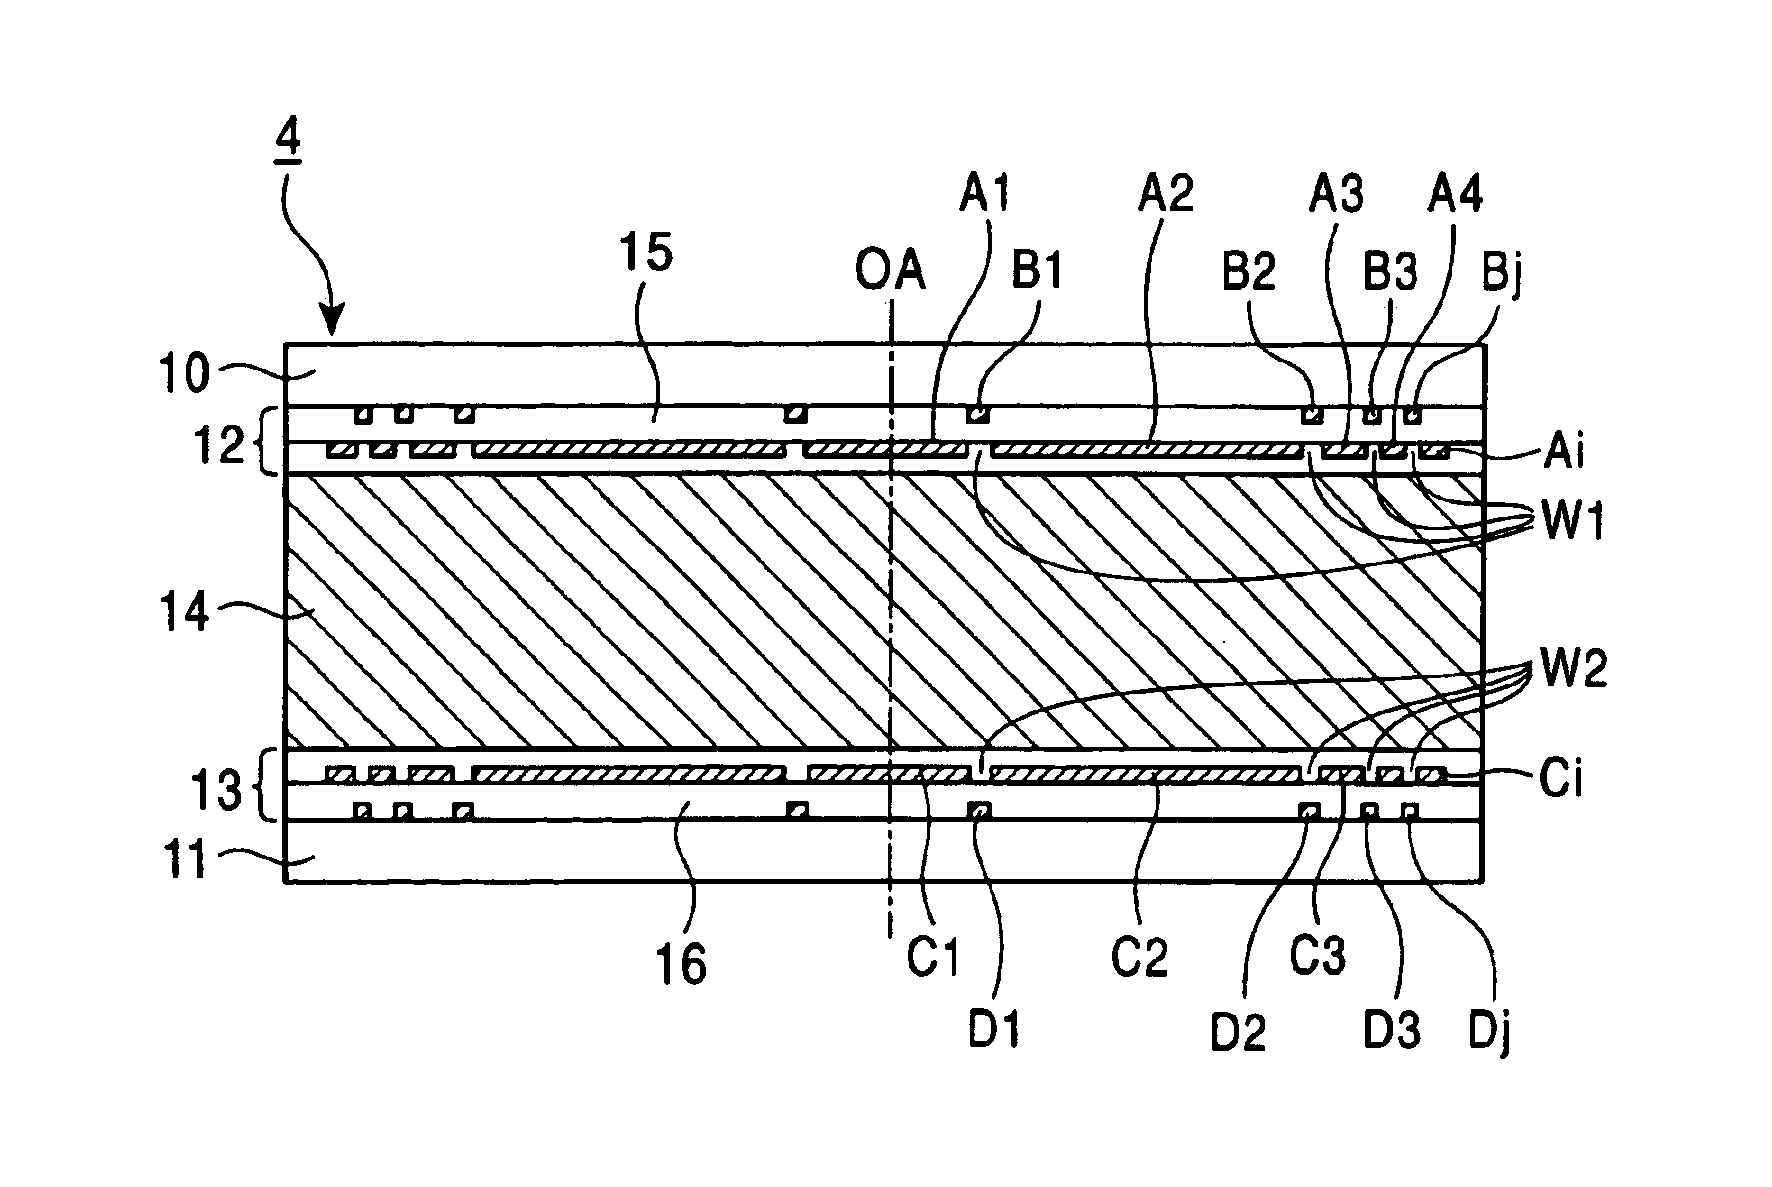 Aberration correcting optical unit, optical pickup apparatus and information recording/reproducing apparatus with single and multi-layer electrodes